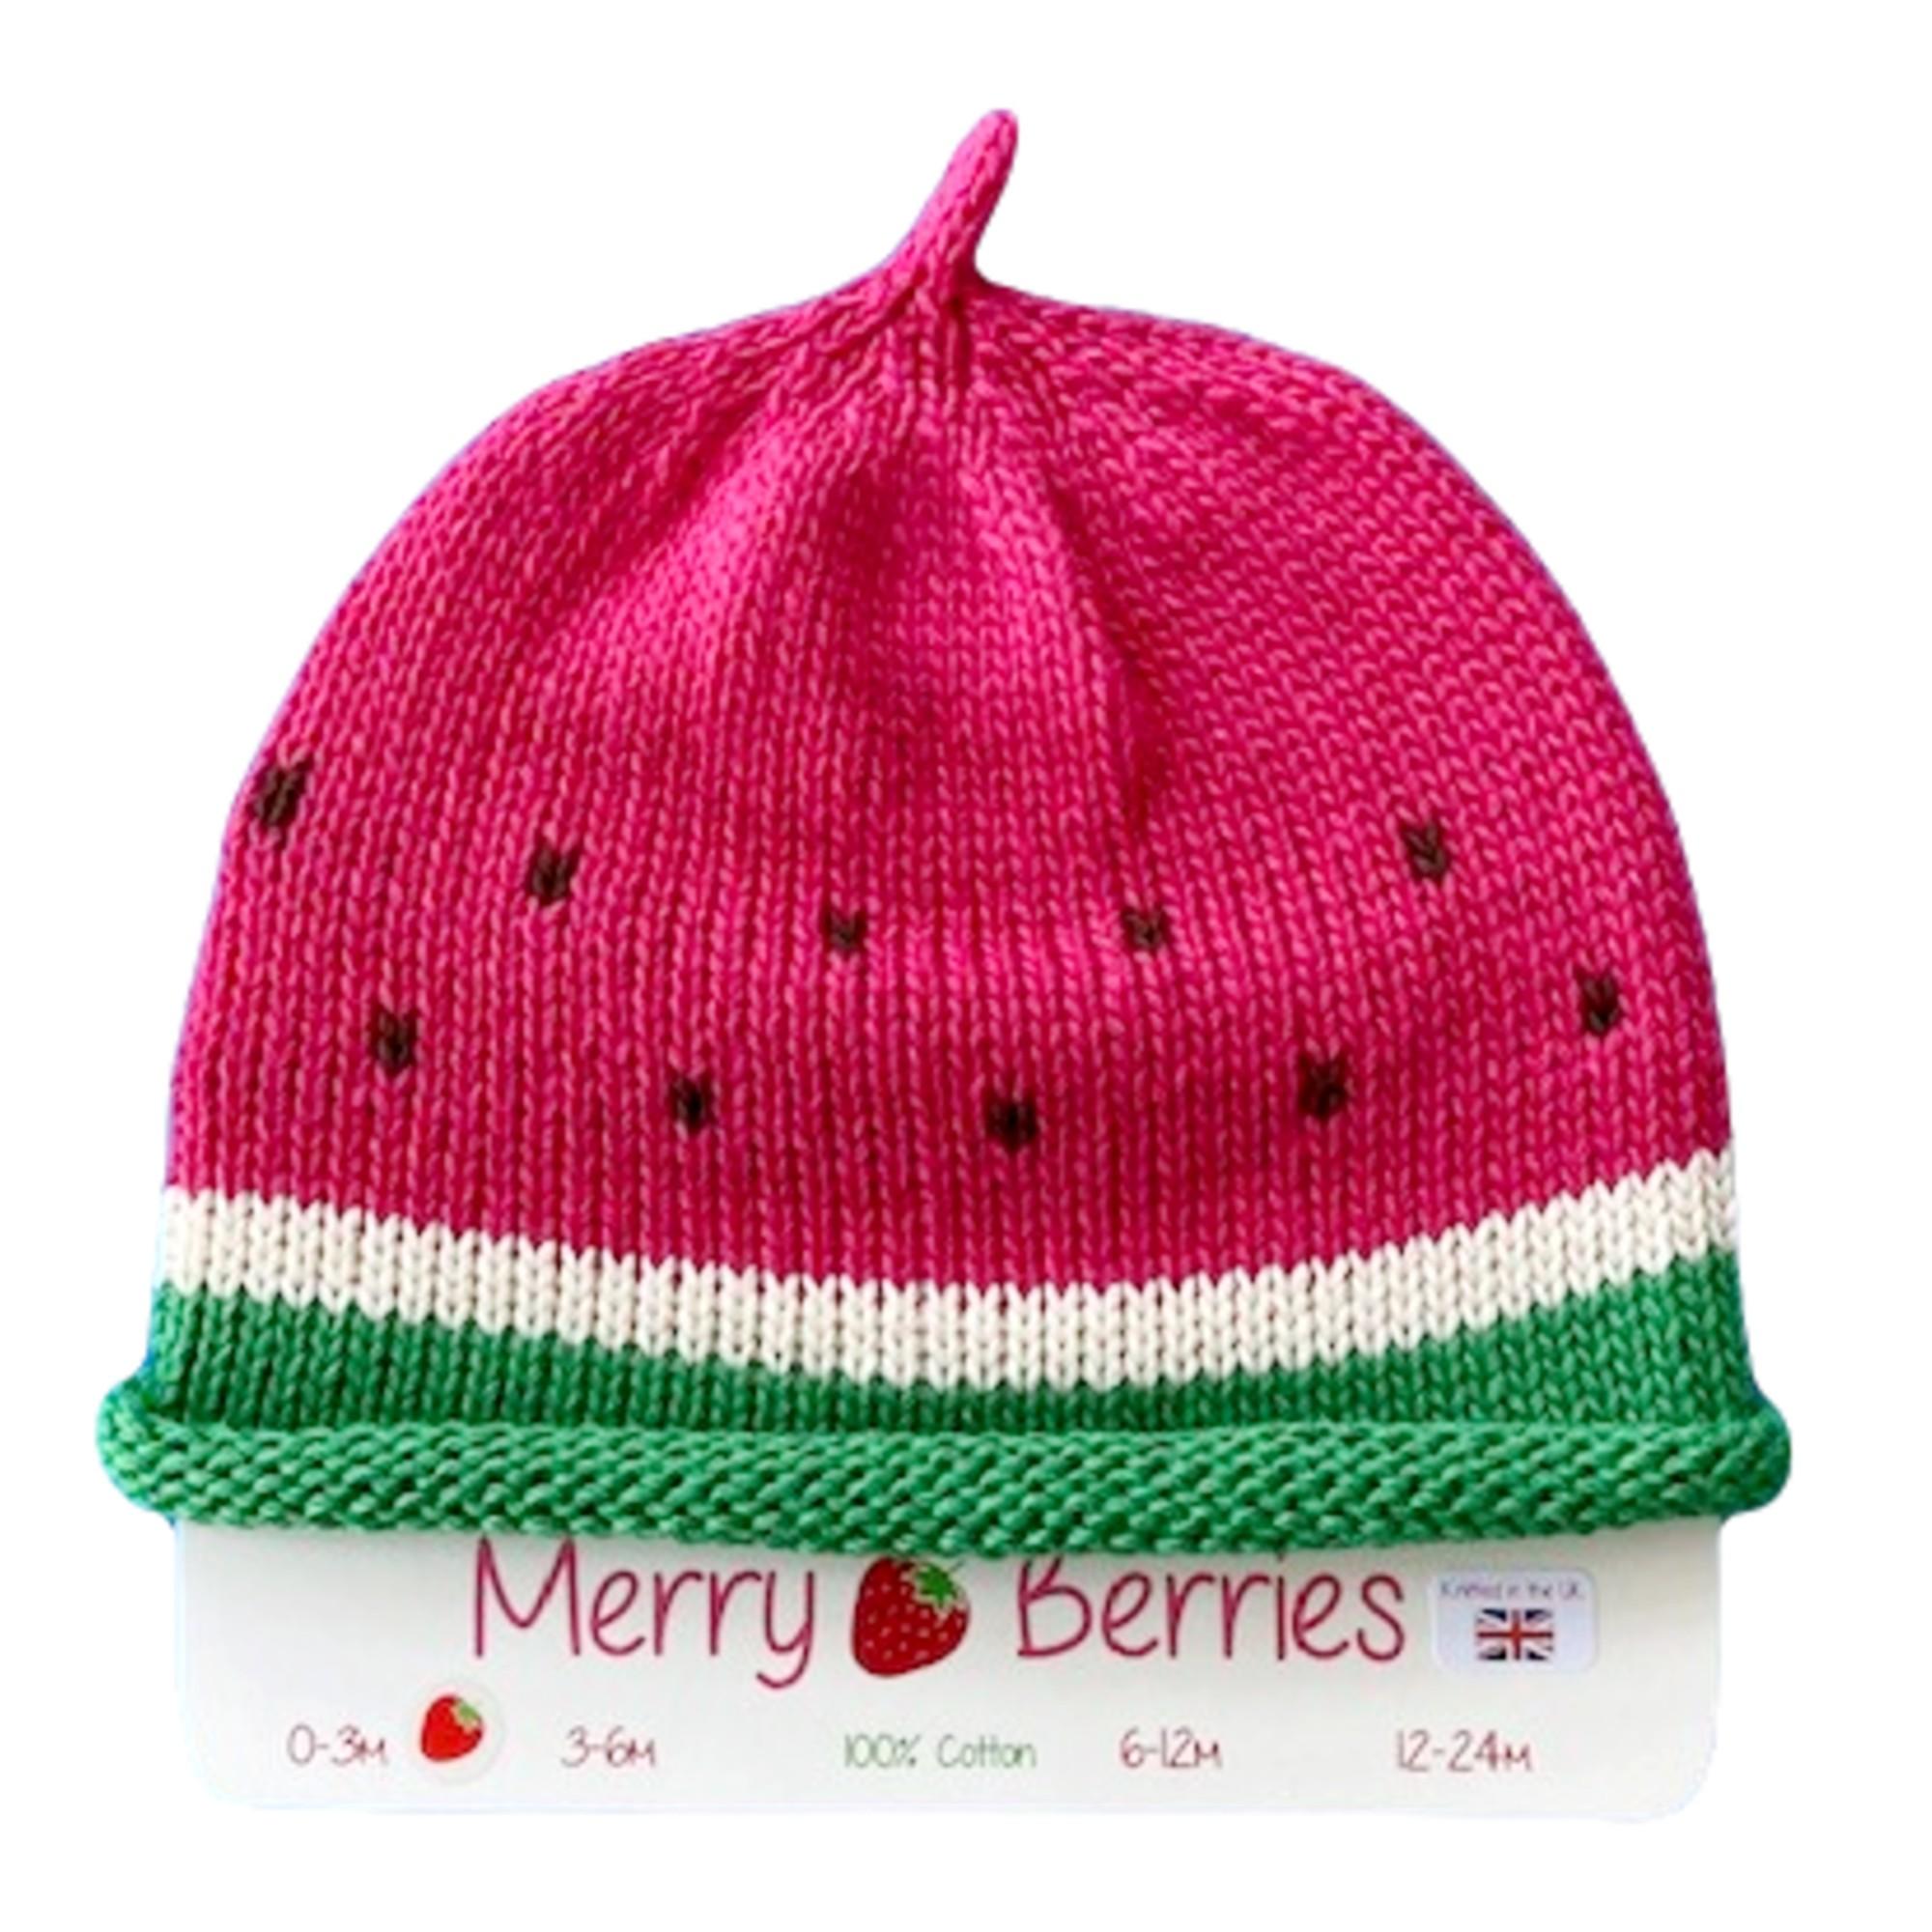 Merry Berries - Watermelon Knitted baby Hat-0-24mths-Cotton